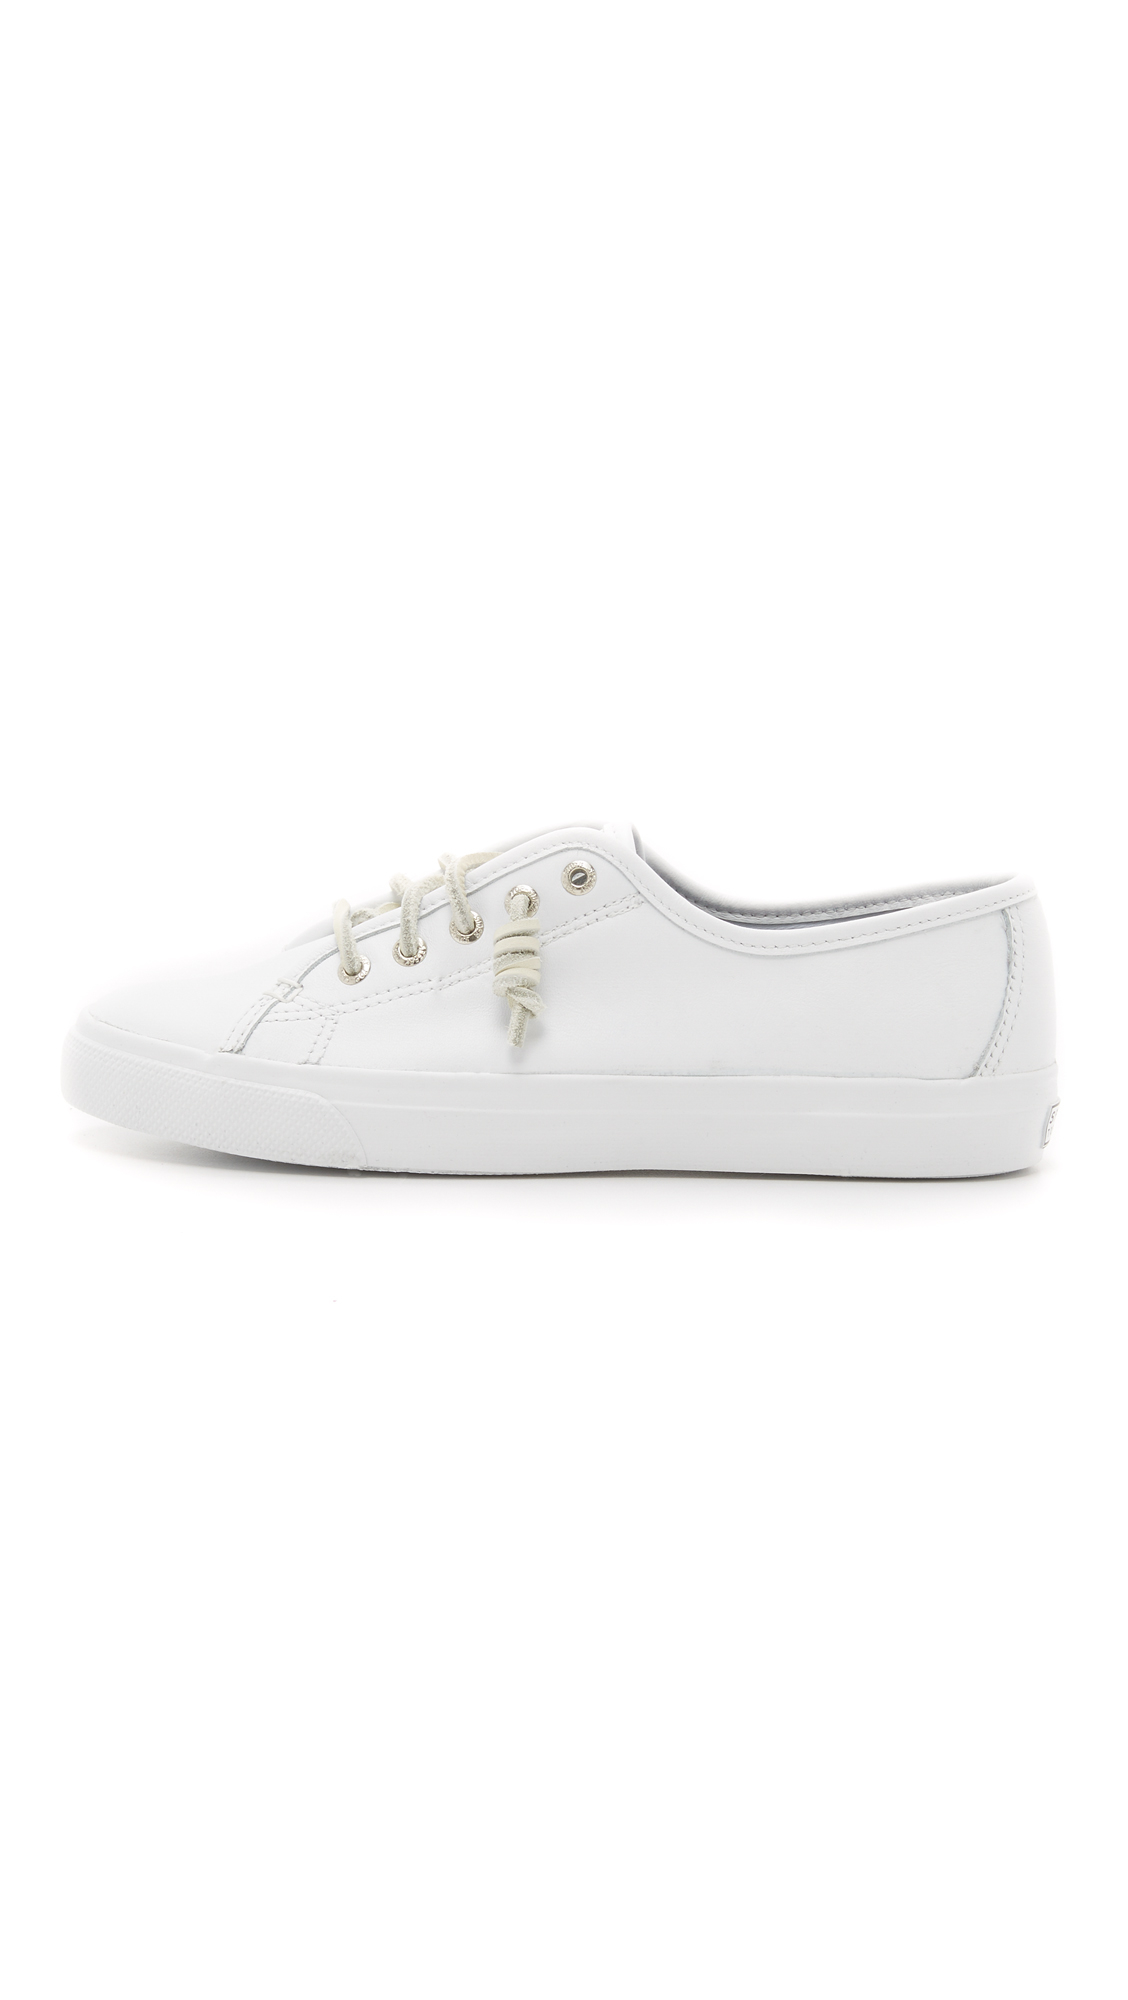 Lyst - Sperry Top-Sider Seacoast Leather Sneakers in White